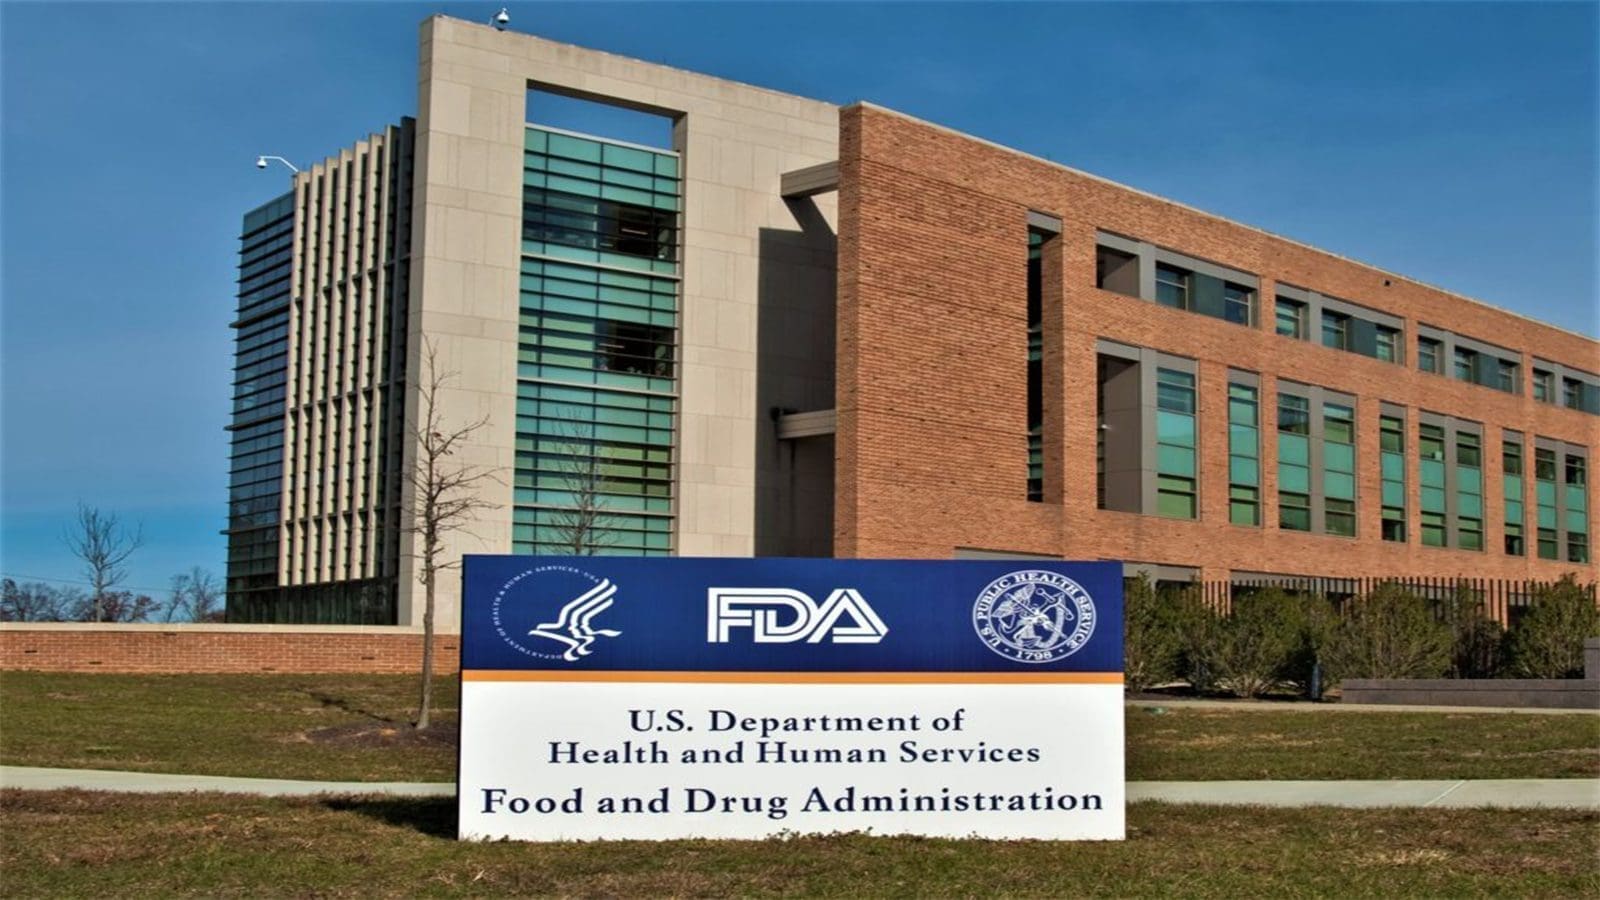 Consumer Brands Association urges FDA to make bold reforms that incorporate full unification of its Human and Animal Foods Program